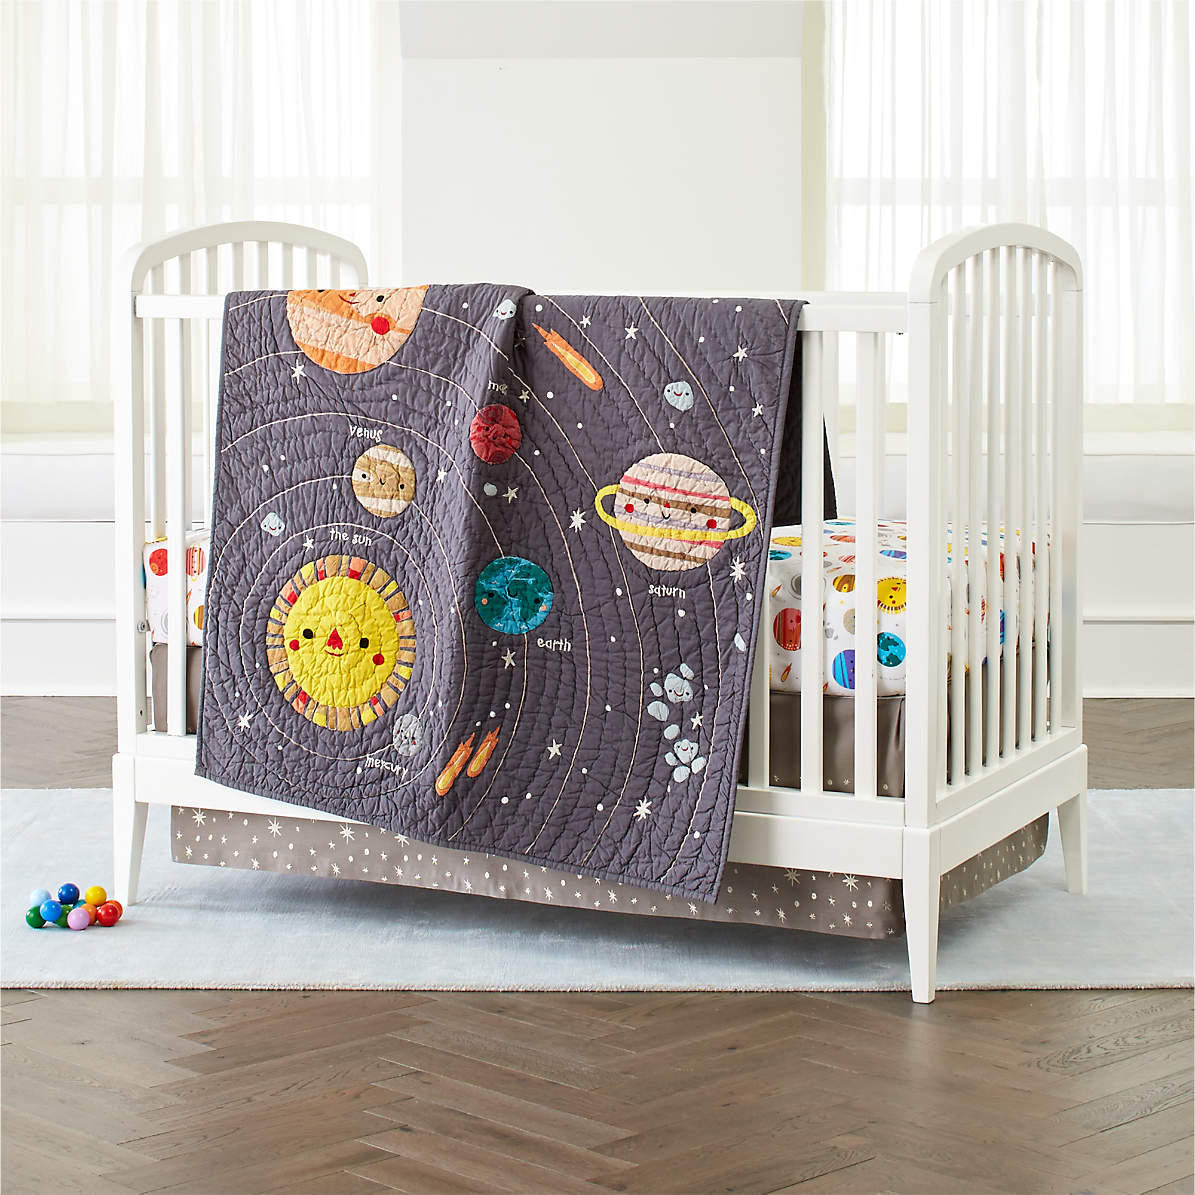 30+DESIGNS BABY BEDDING SET COT OR COT BED inc BUMPER+COVERS+DUVETS+CANOPY+MORE 